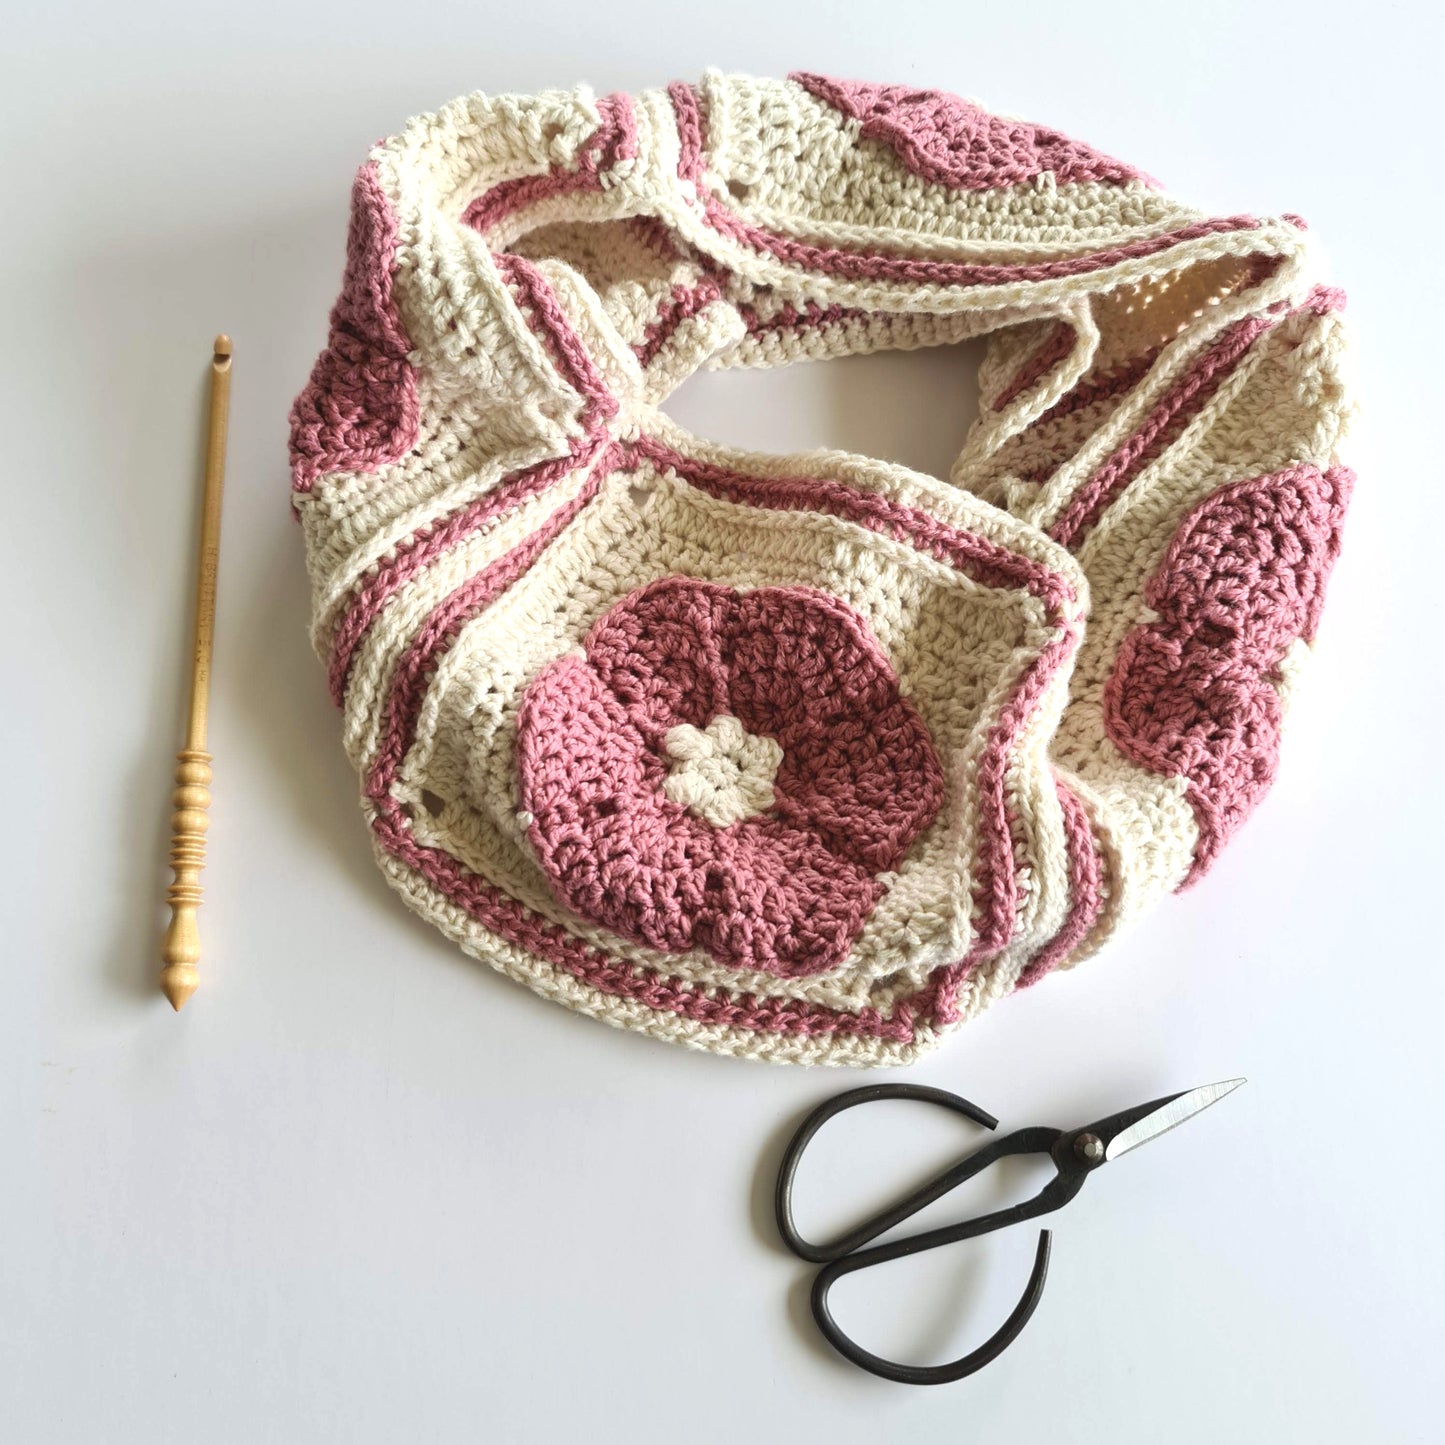 Iris Cowl by Shelley Husband in pink and cream with a wooden crochet hook and a pair of black yarn scissors